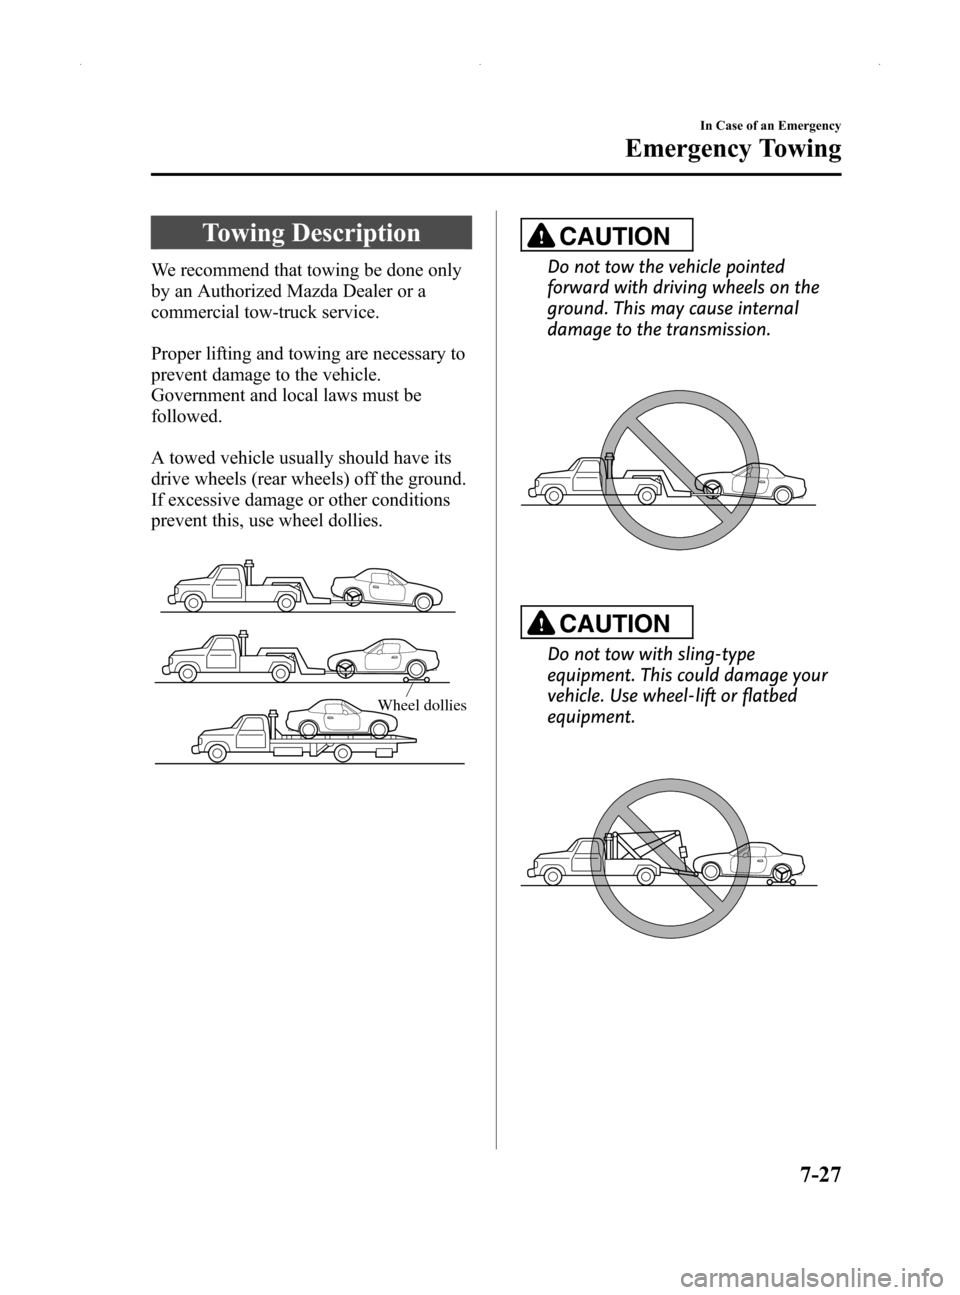 MAZDA MODEL MX-5 2014  Owners Manual (in English) Black plate (327,1)
Towing Description
We recommend that towing be done only
by an Authorized Mazda Dealer or a
commercial tow-truck service.
Proper lifting and towing are necessary to
prevent damage 